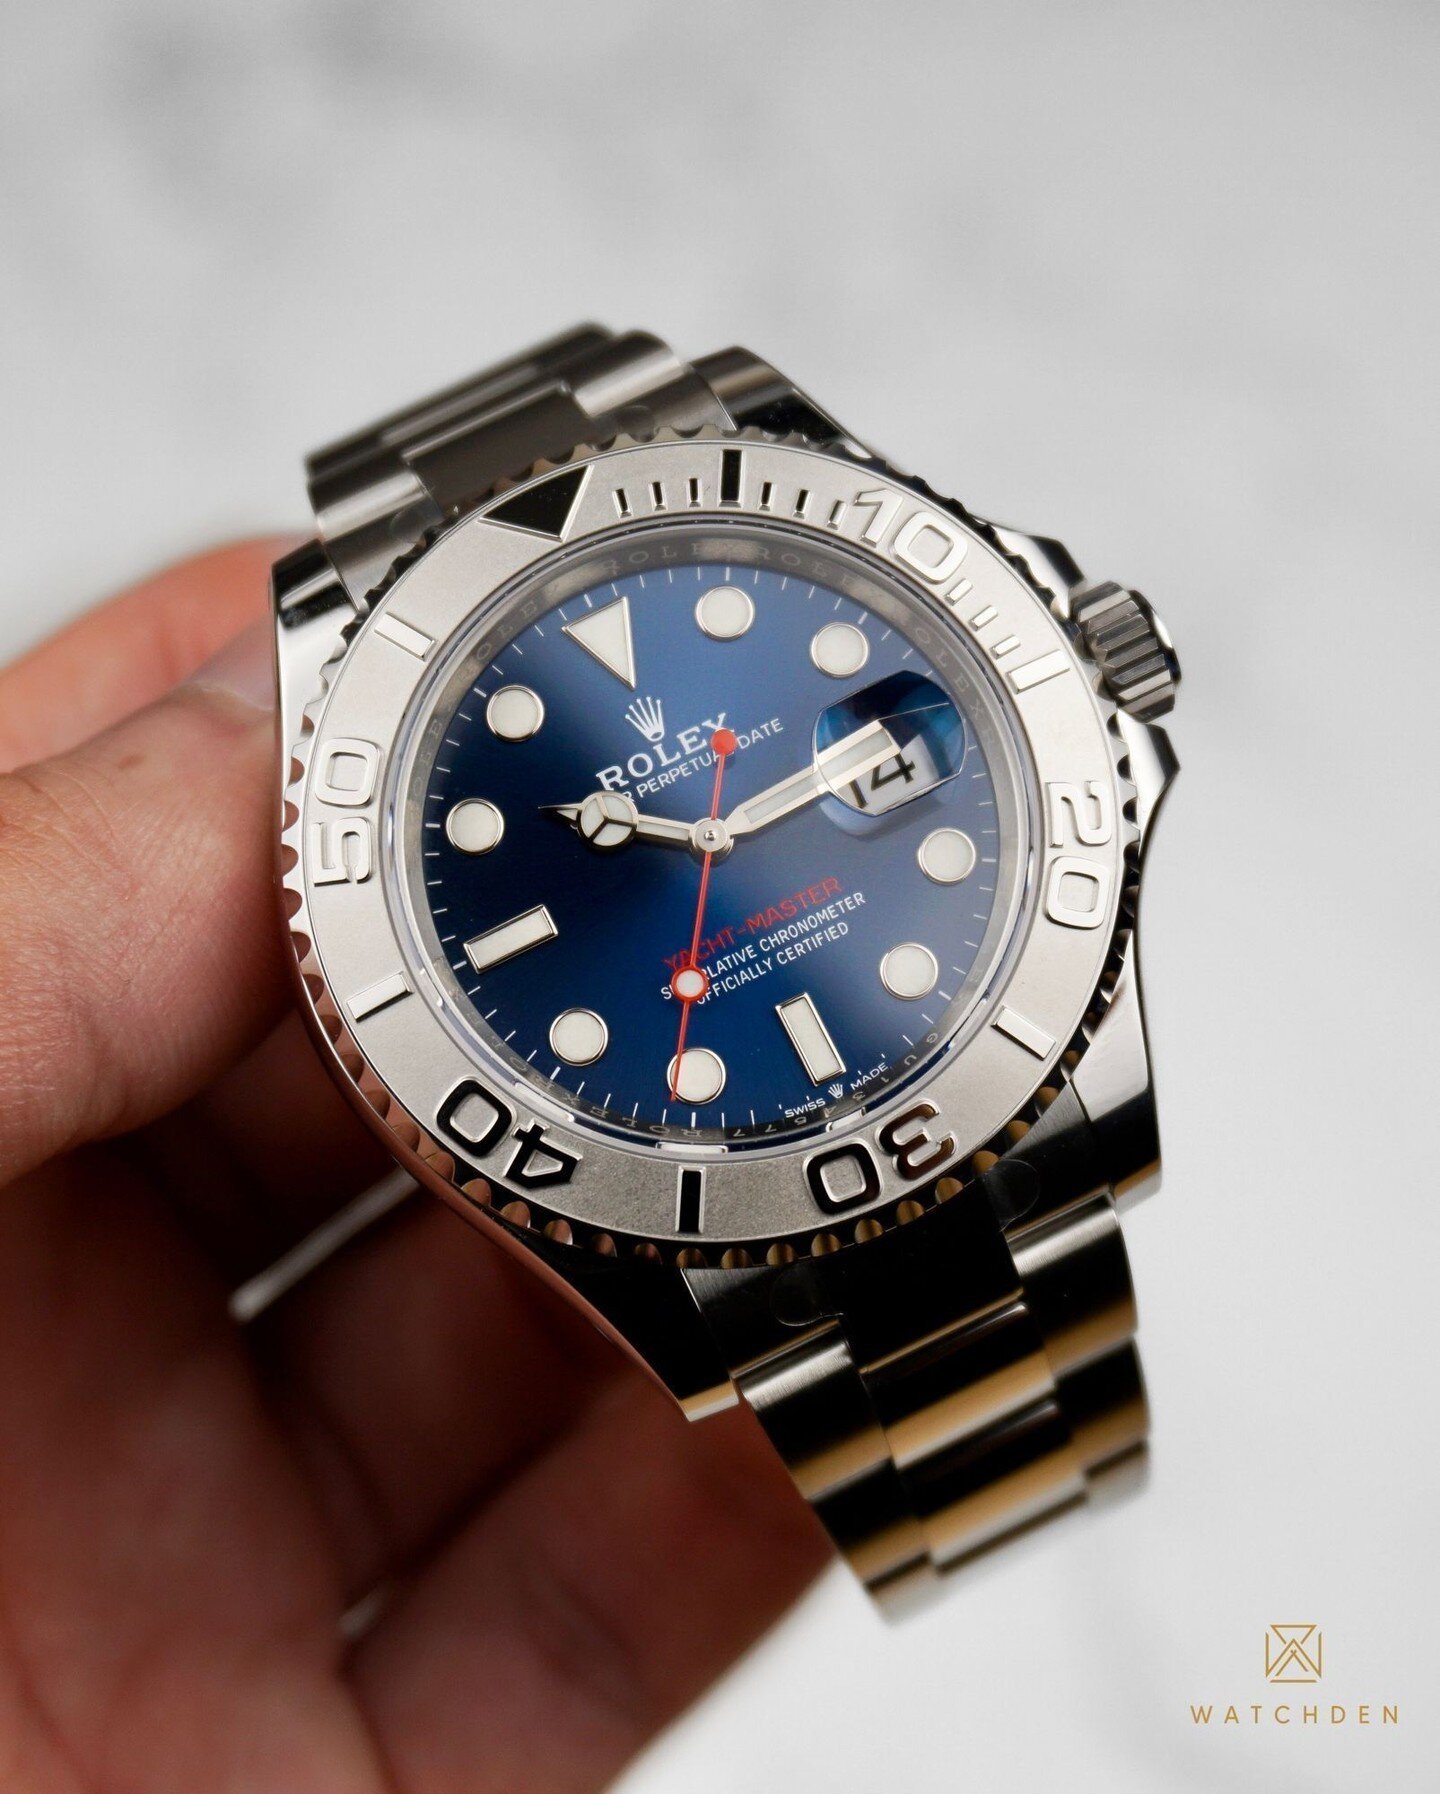 A premium luxury timepiece for the poised, a panache among Yacht Masters built-in platinum, Rolex Yacht-Master 40 Ref. 126622 has carved a unique position of its own. 

Its bezel is made of precious materials, including the Rolex-exclusive Rolesium, 